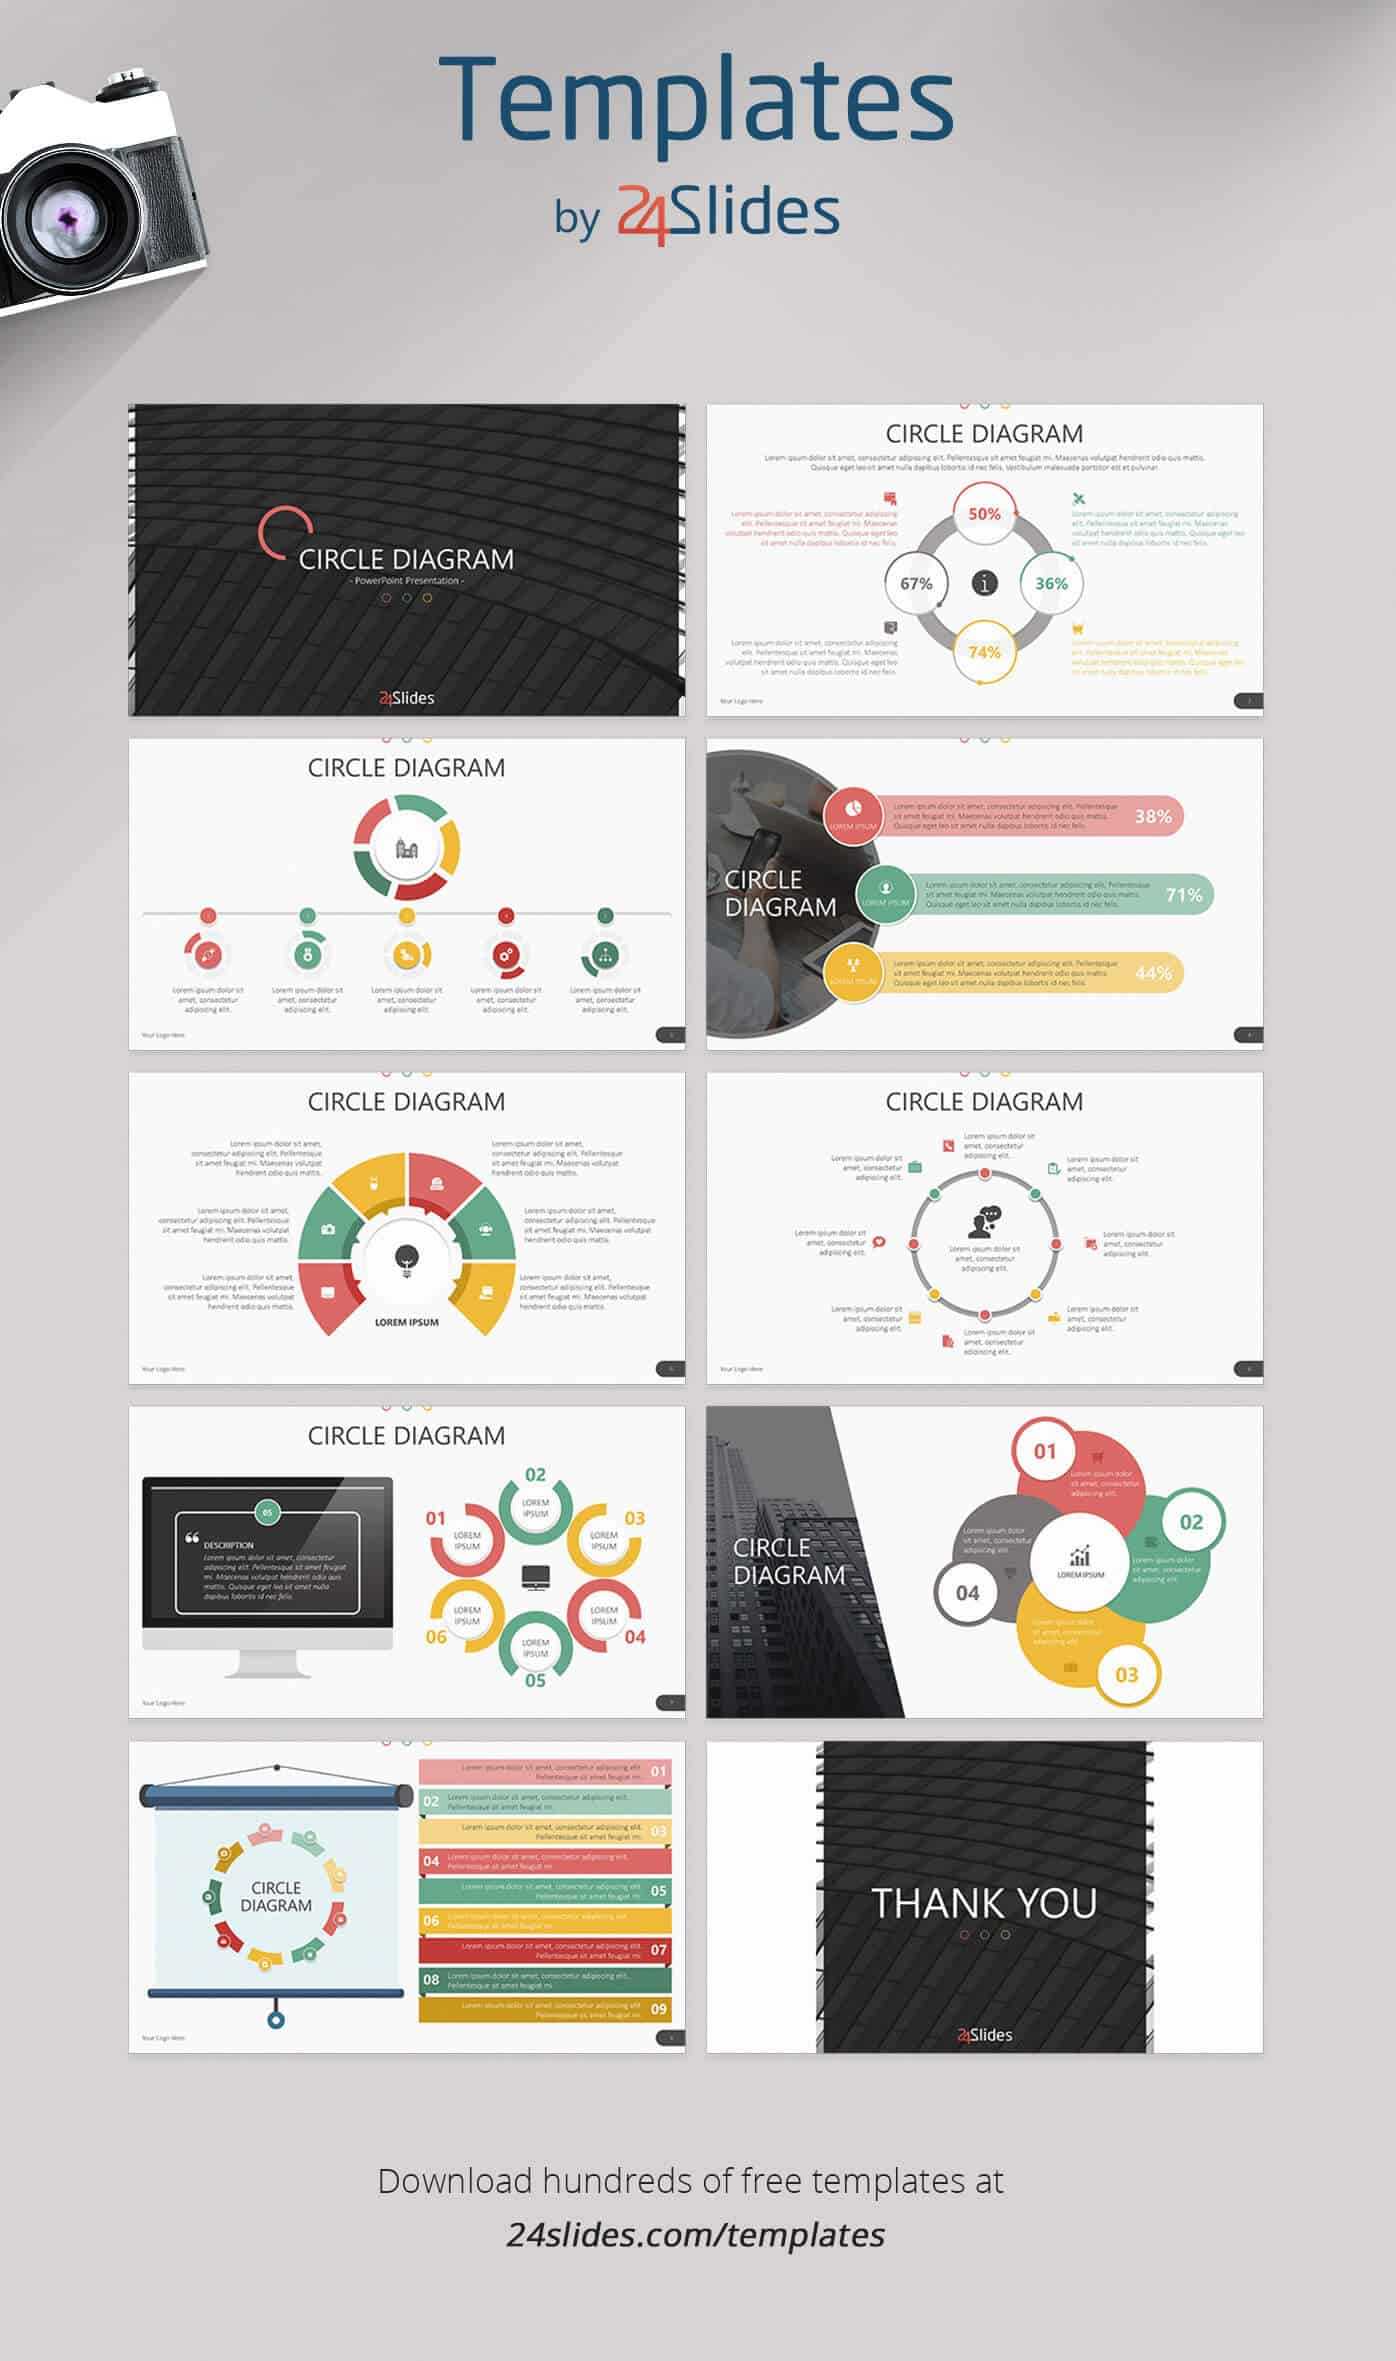 15 Fun And Colorful Free Powerpoint Templates | Present Better Intended For Fun Powerpoint Templates Free Download